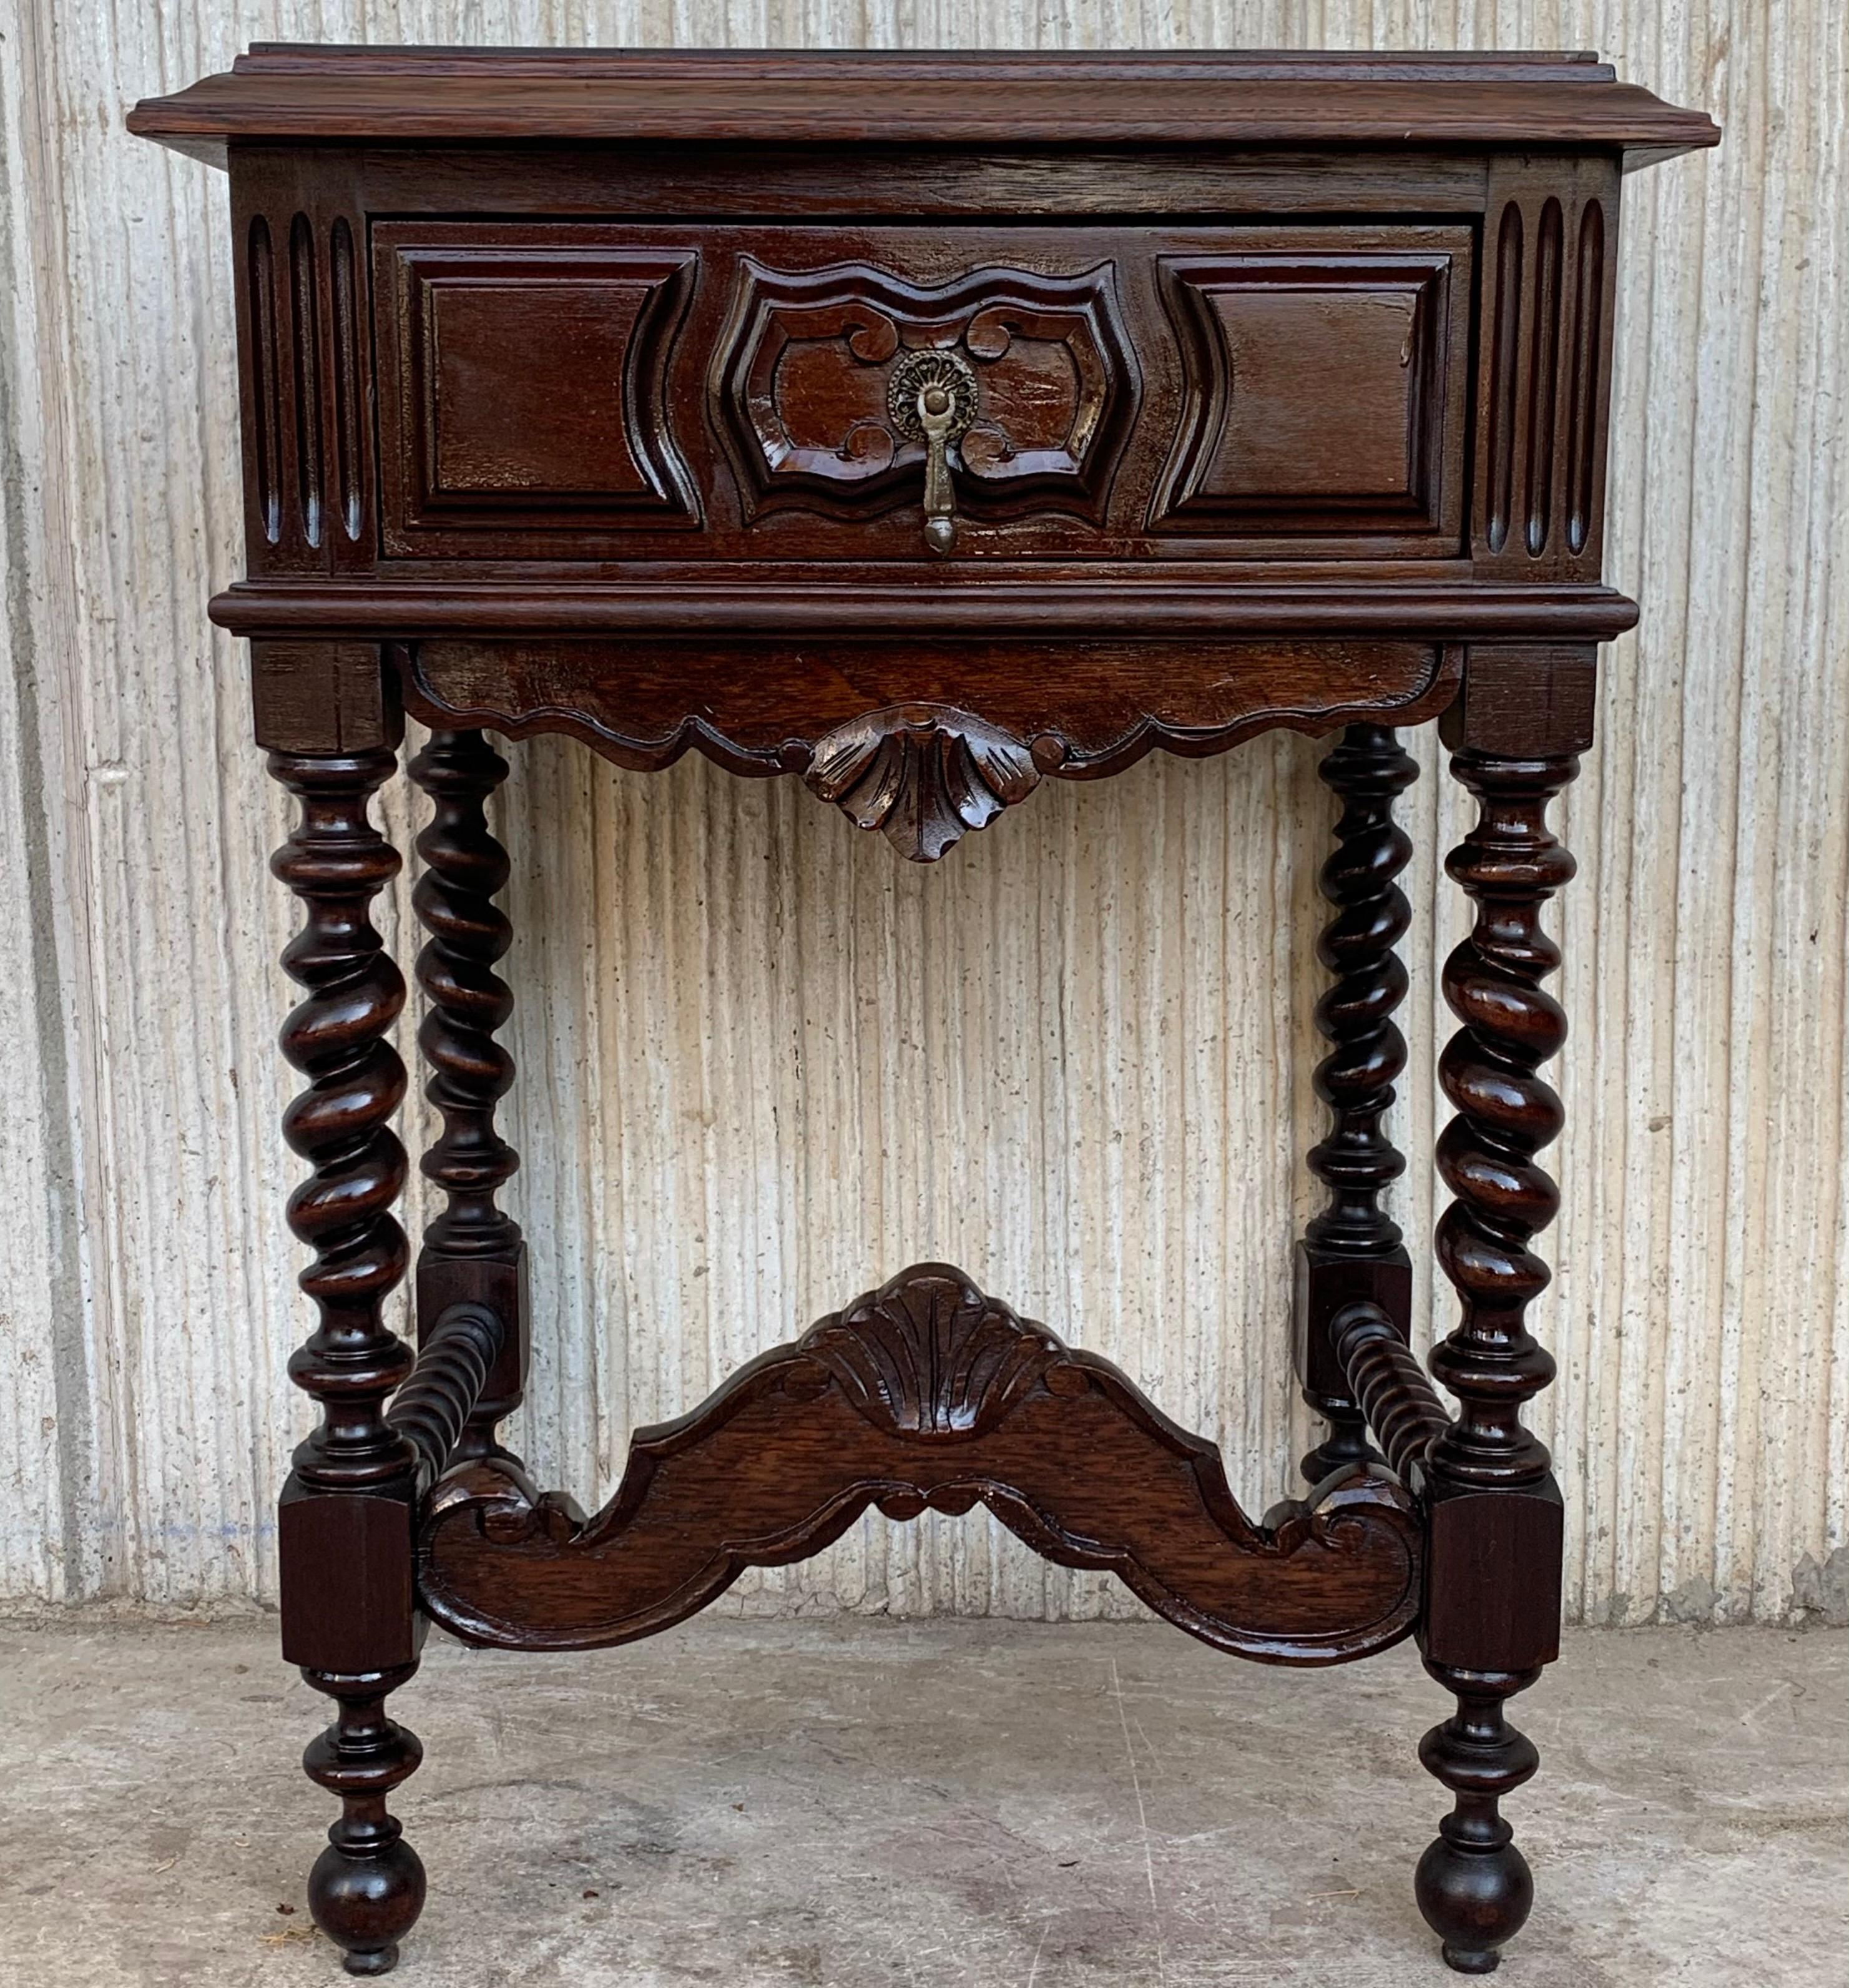 20th century pair of solid carved French nightstands with Turned columns
It has one carved drawer and wood T.form stretcher.